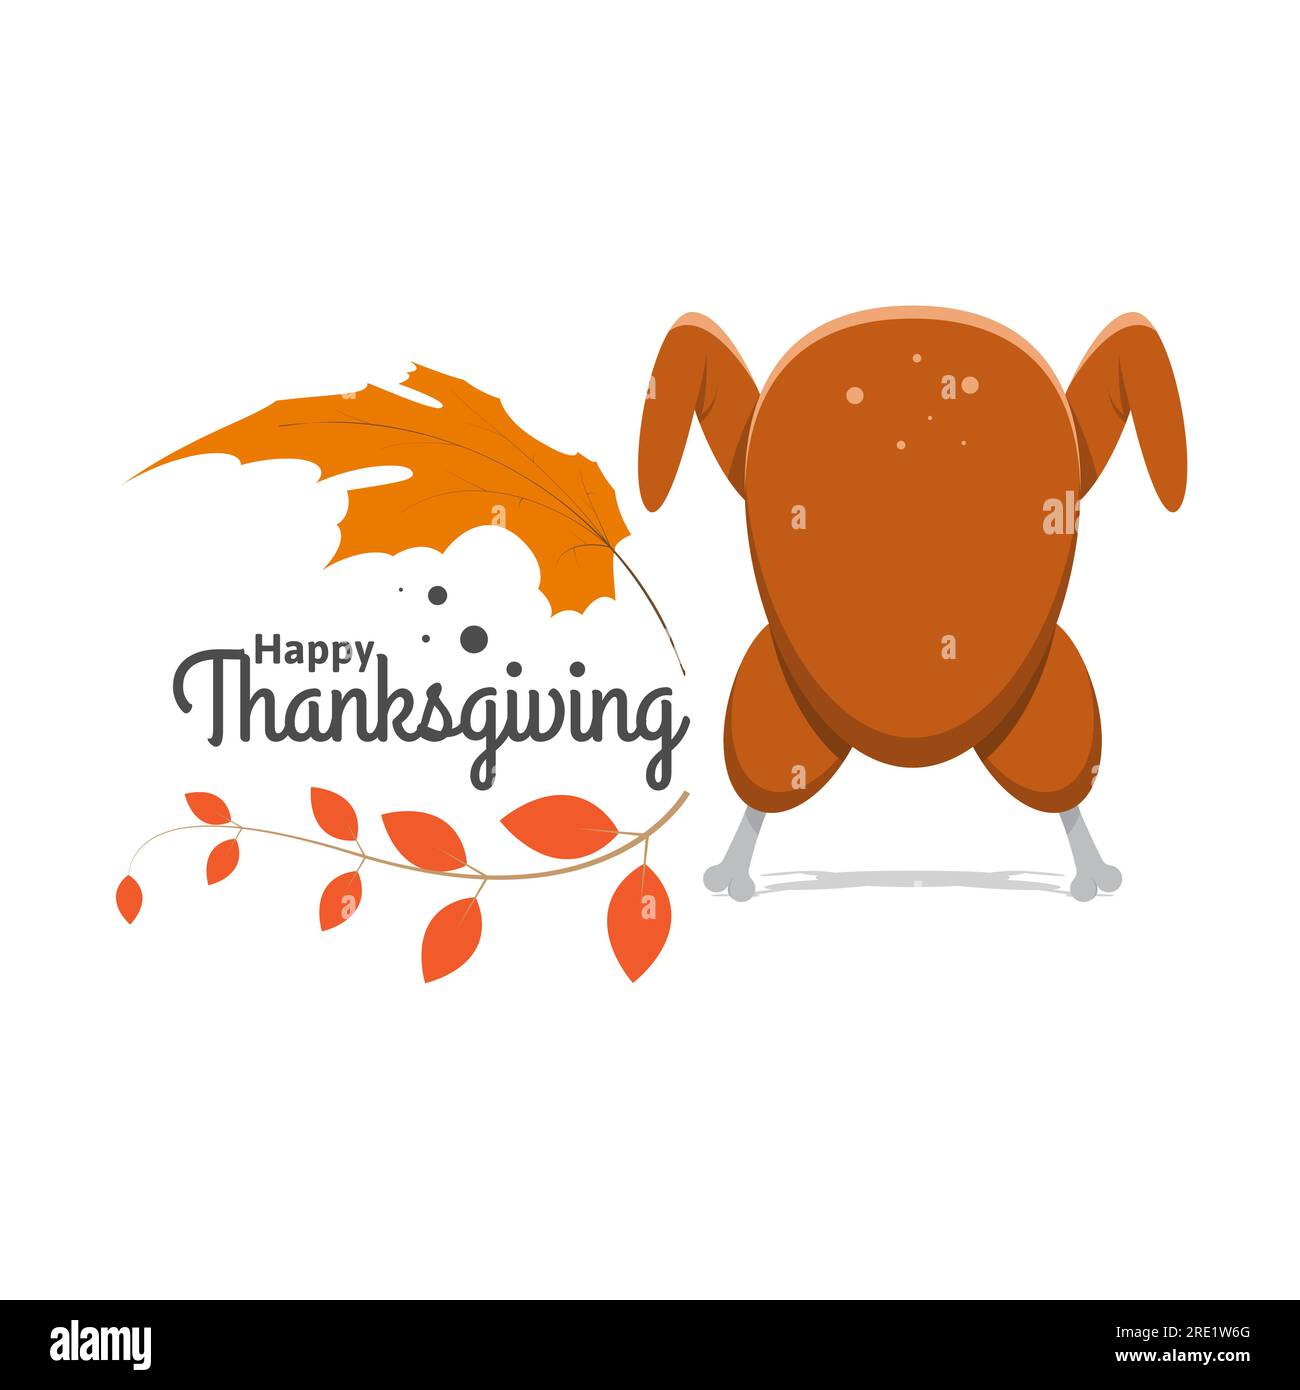 happy thanks giving background with roasted turkey and leaves. suitable for banner, greeting card, poster, etc. vector illustration Stock Vector